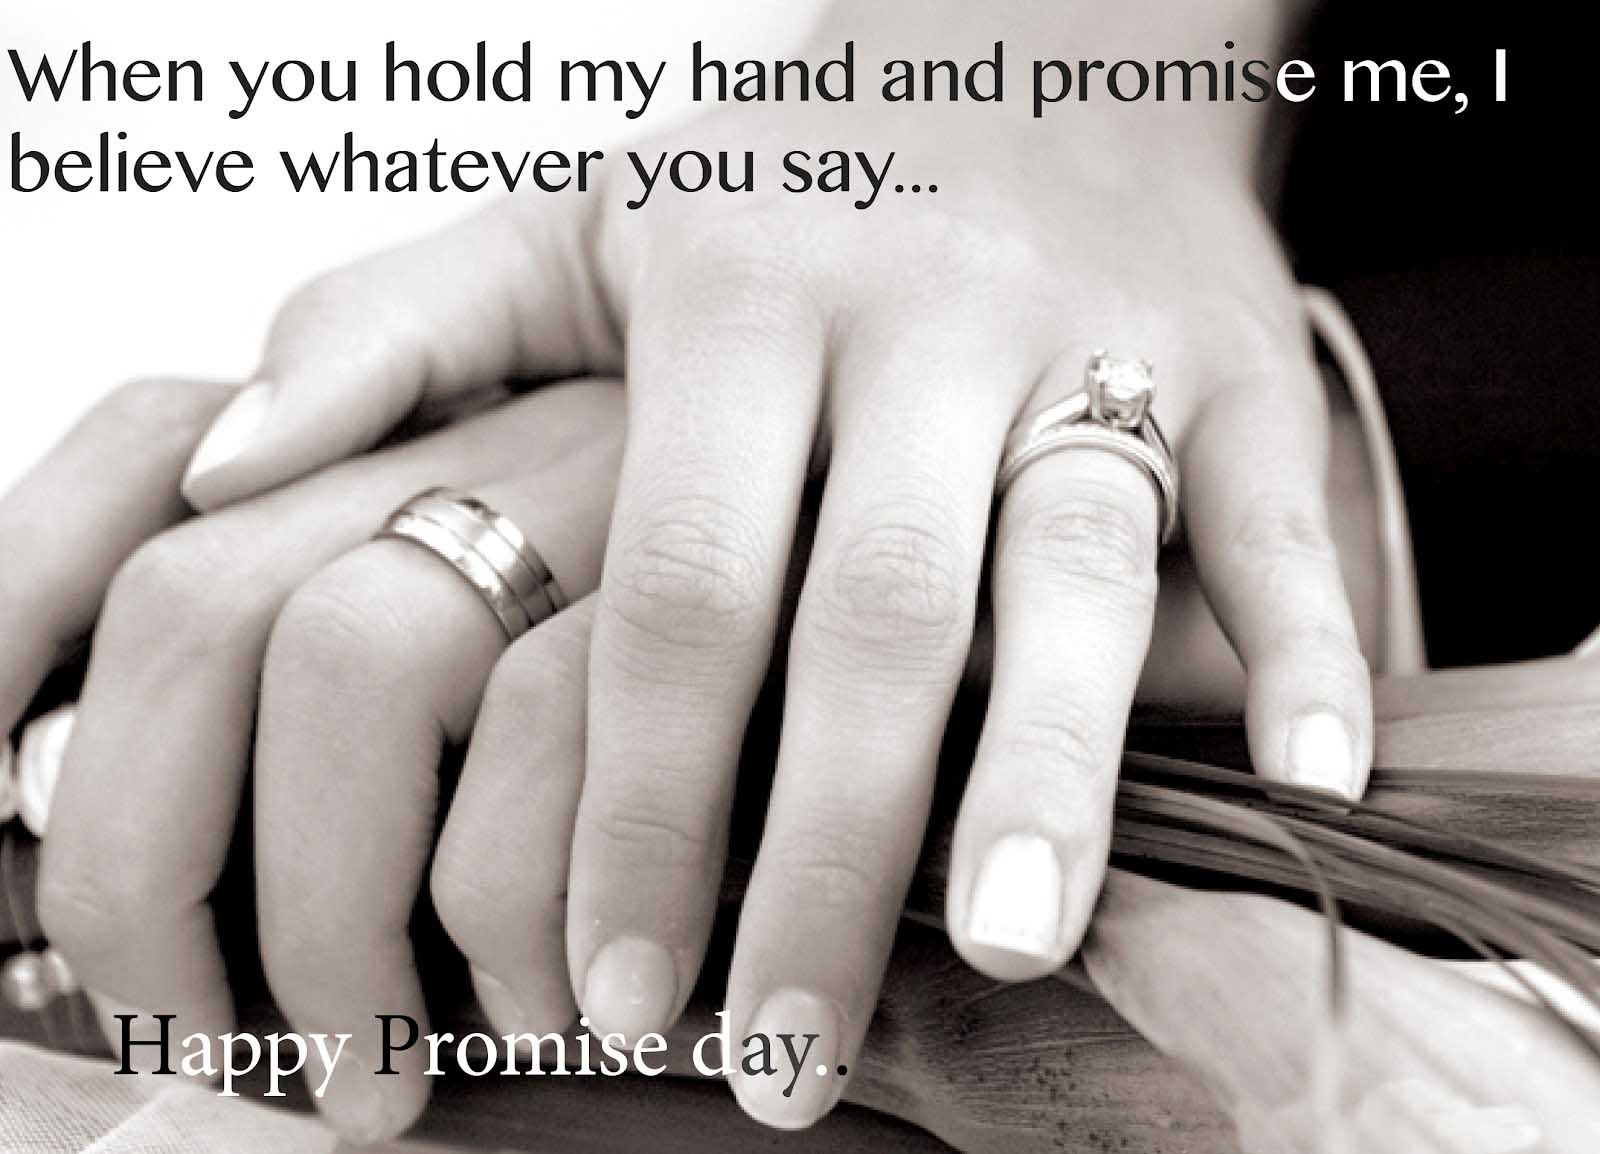 Happy Promise Day Images Hd - Happy Promise Day - HD Wallpaper 